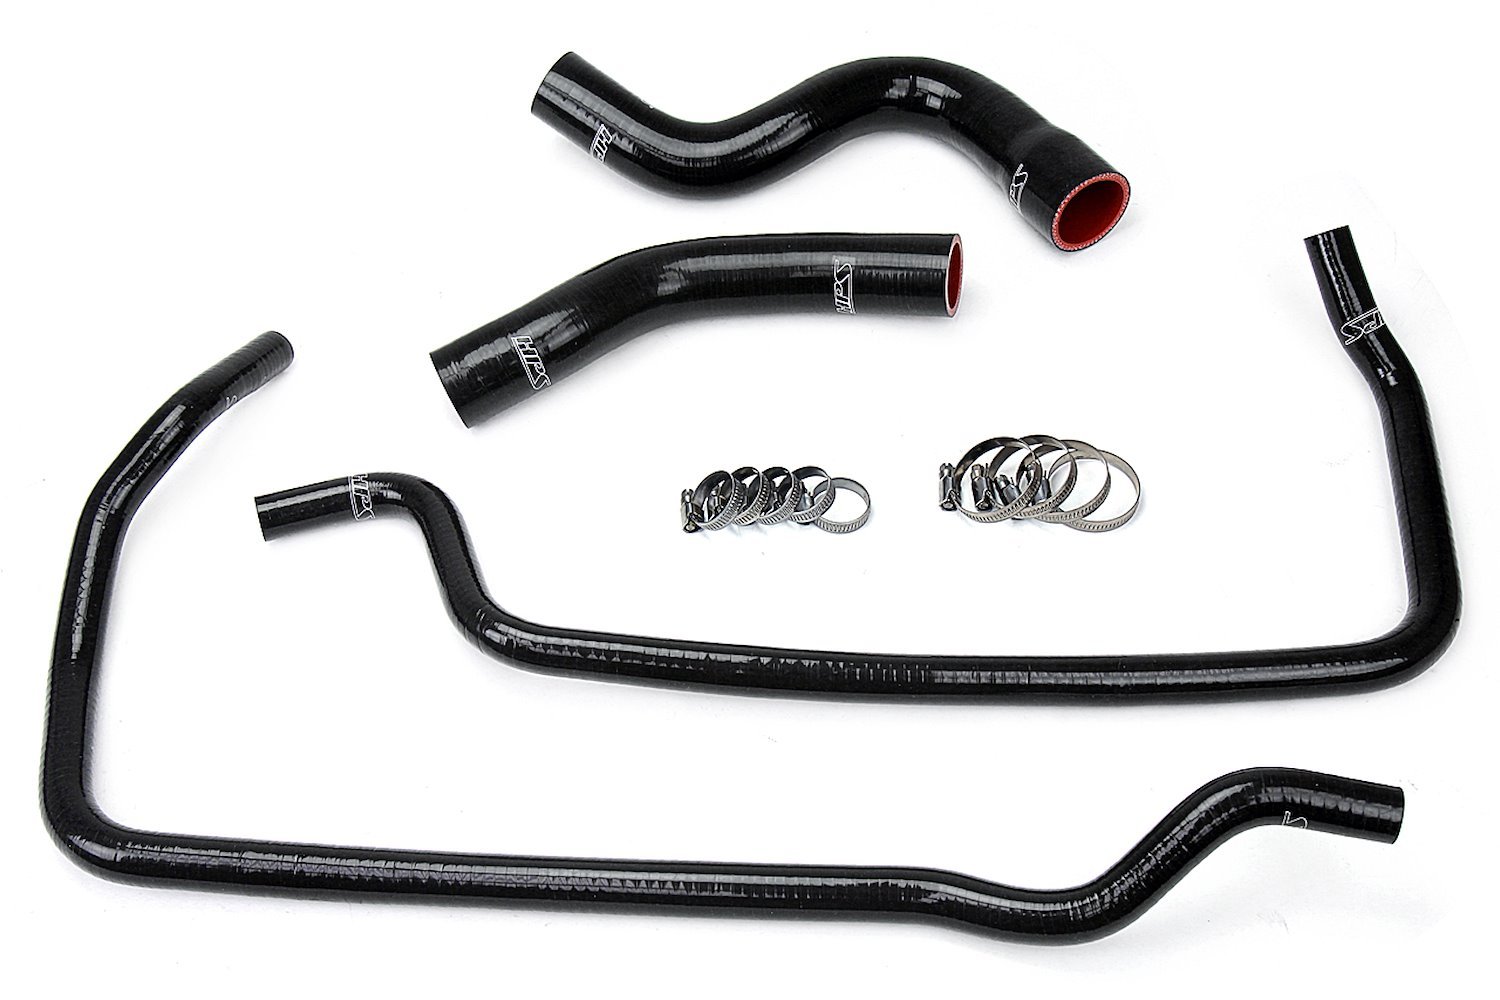 57-1449-BLK Coolant Hose Kit, High-Temp 3-Ply Reinforced Silicone, Replace Rubber Radiator Heater Coolant Hoses